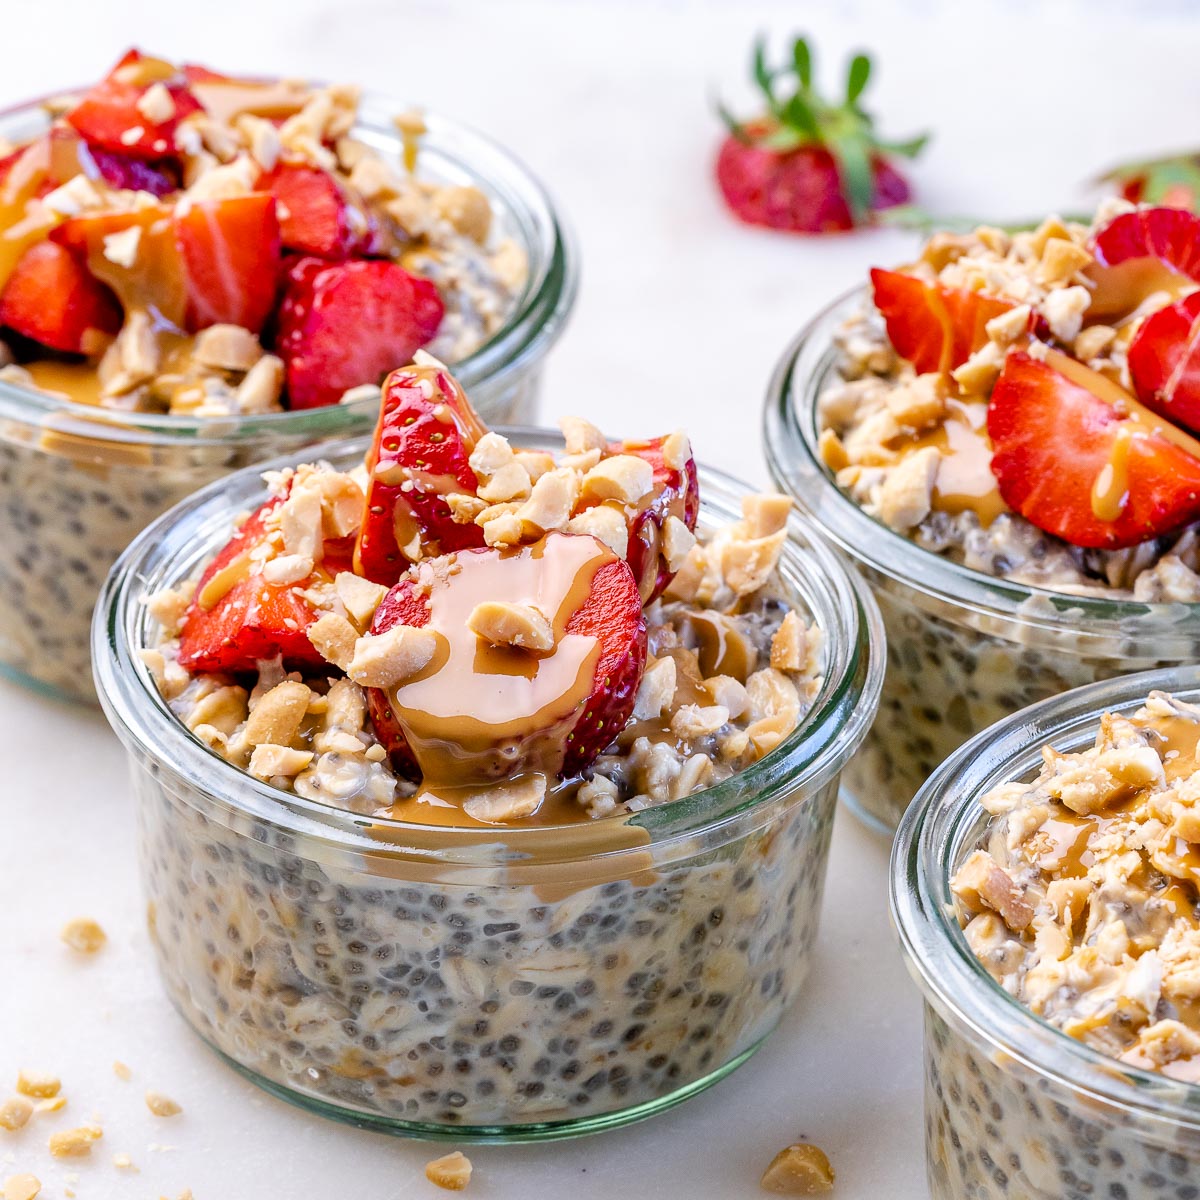 51 Healthy Overnight Oats Recipes for Weight Loss — Eat This Not That